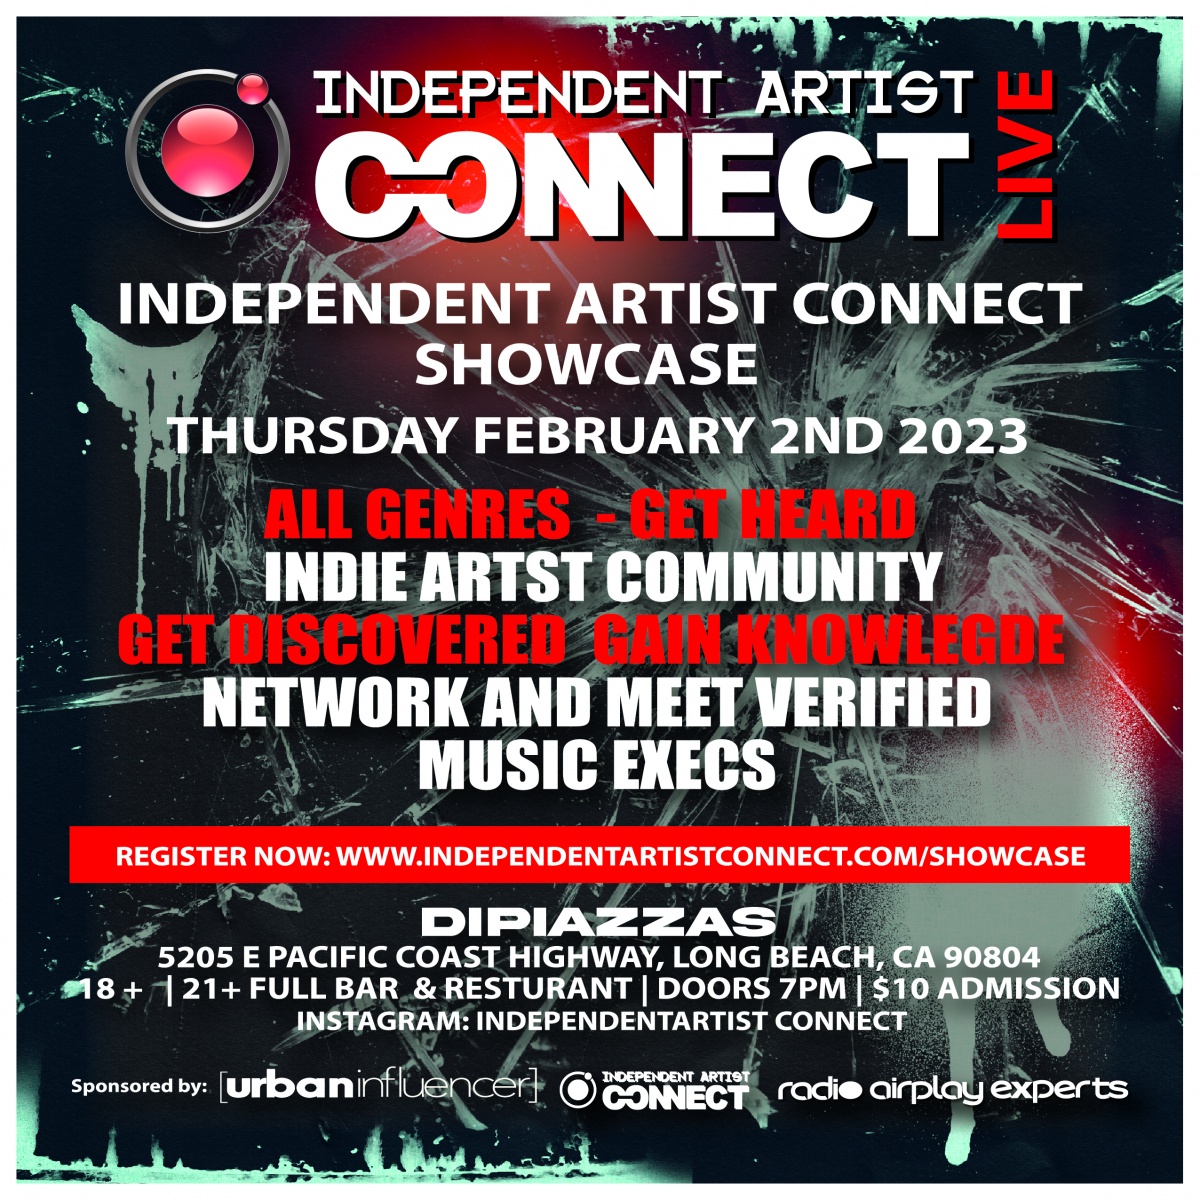 Event: INDEPENDENT ARTIST CONNECT SHOWCASE. 